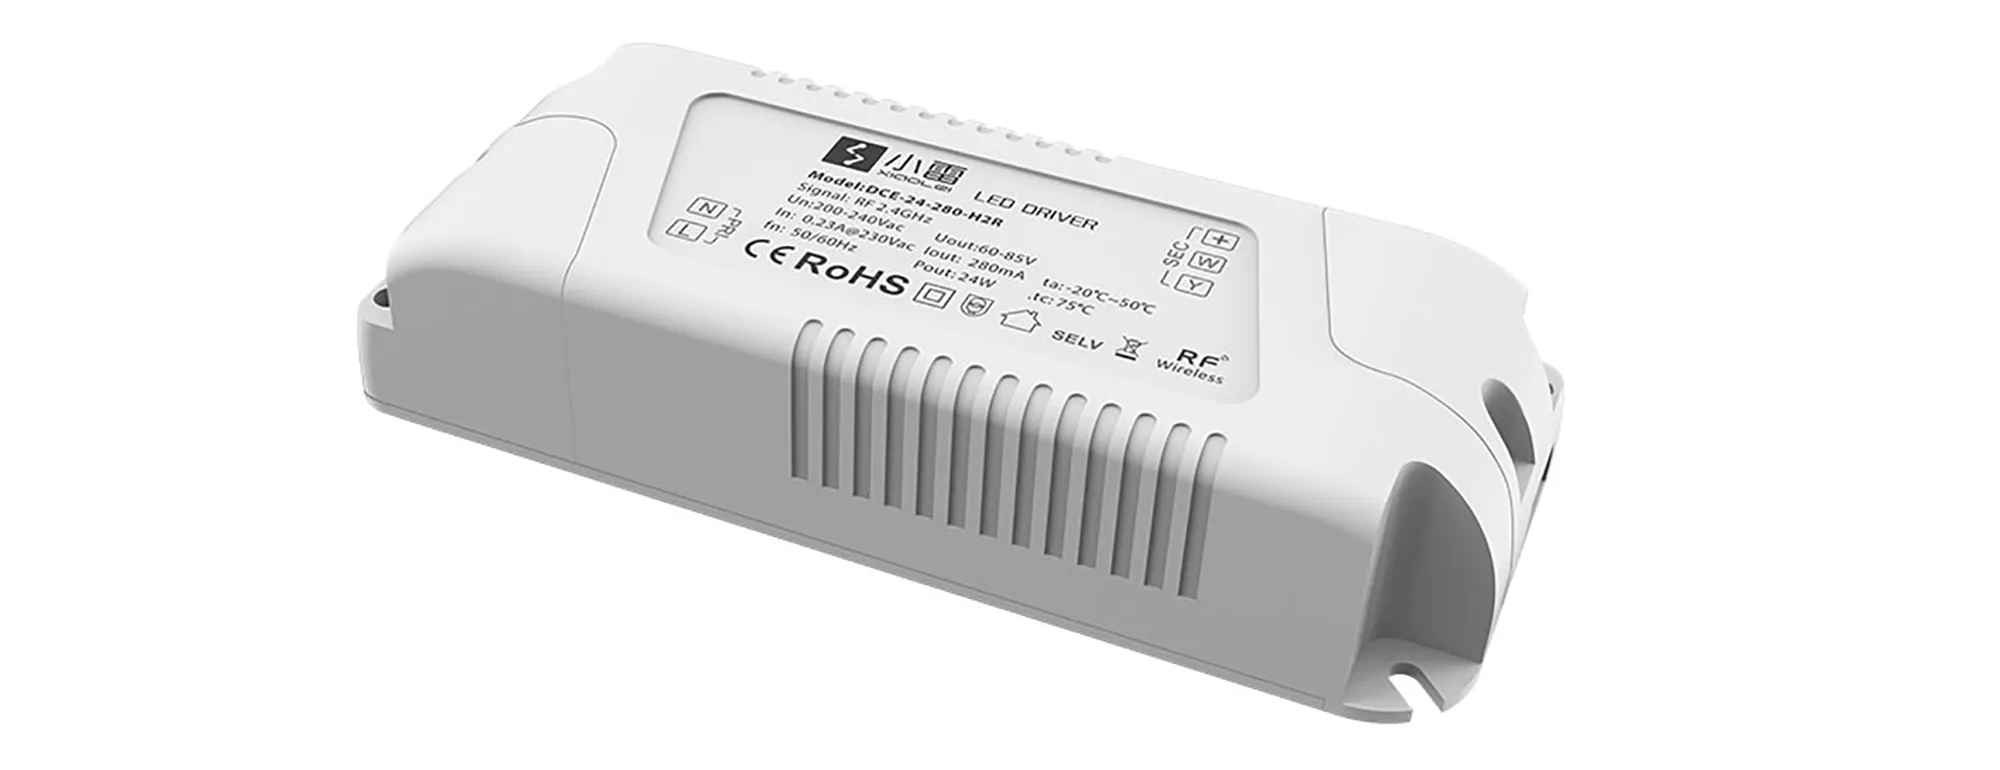 DCE-24-280-H2R  Ltech Wireless Dimmable Driver 24W 60-85Vdc/280mA .0-100% PWM dimming level; IP20.